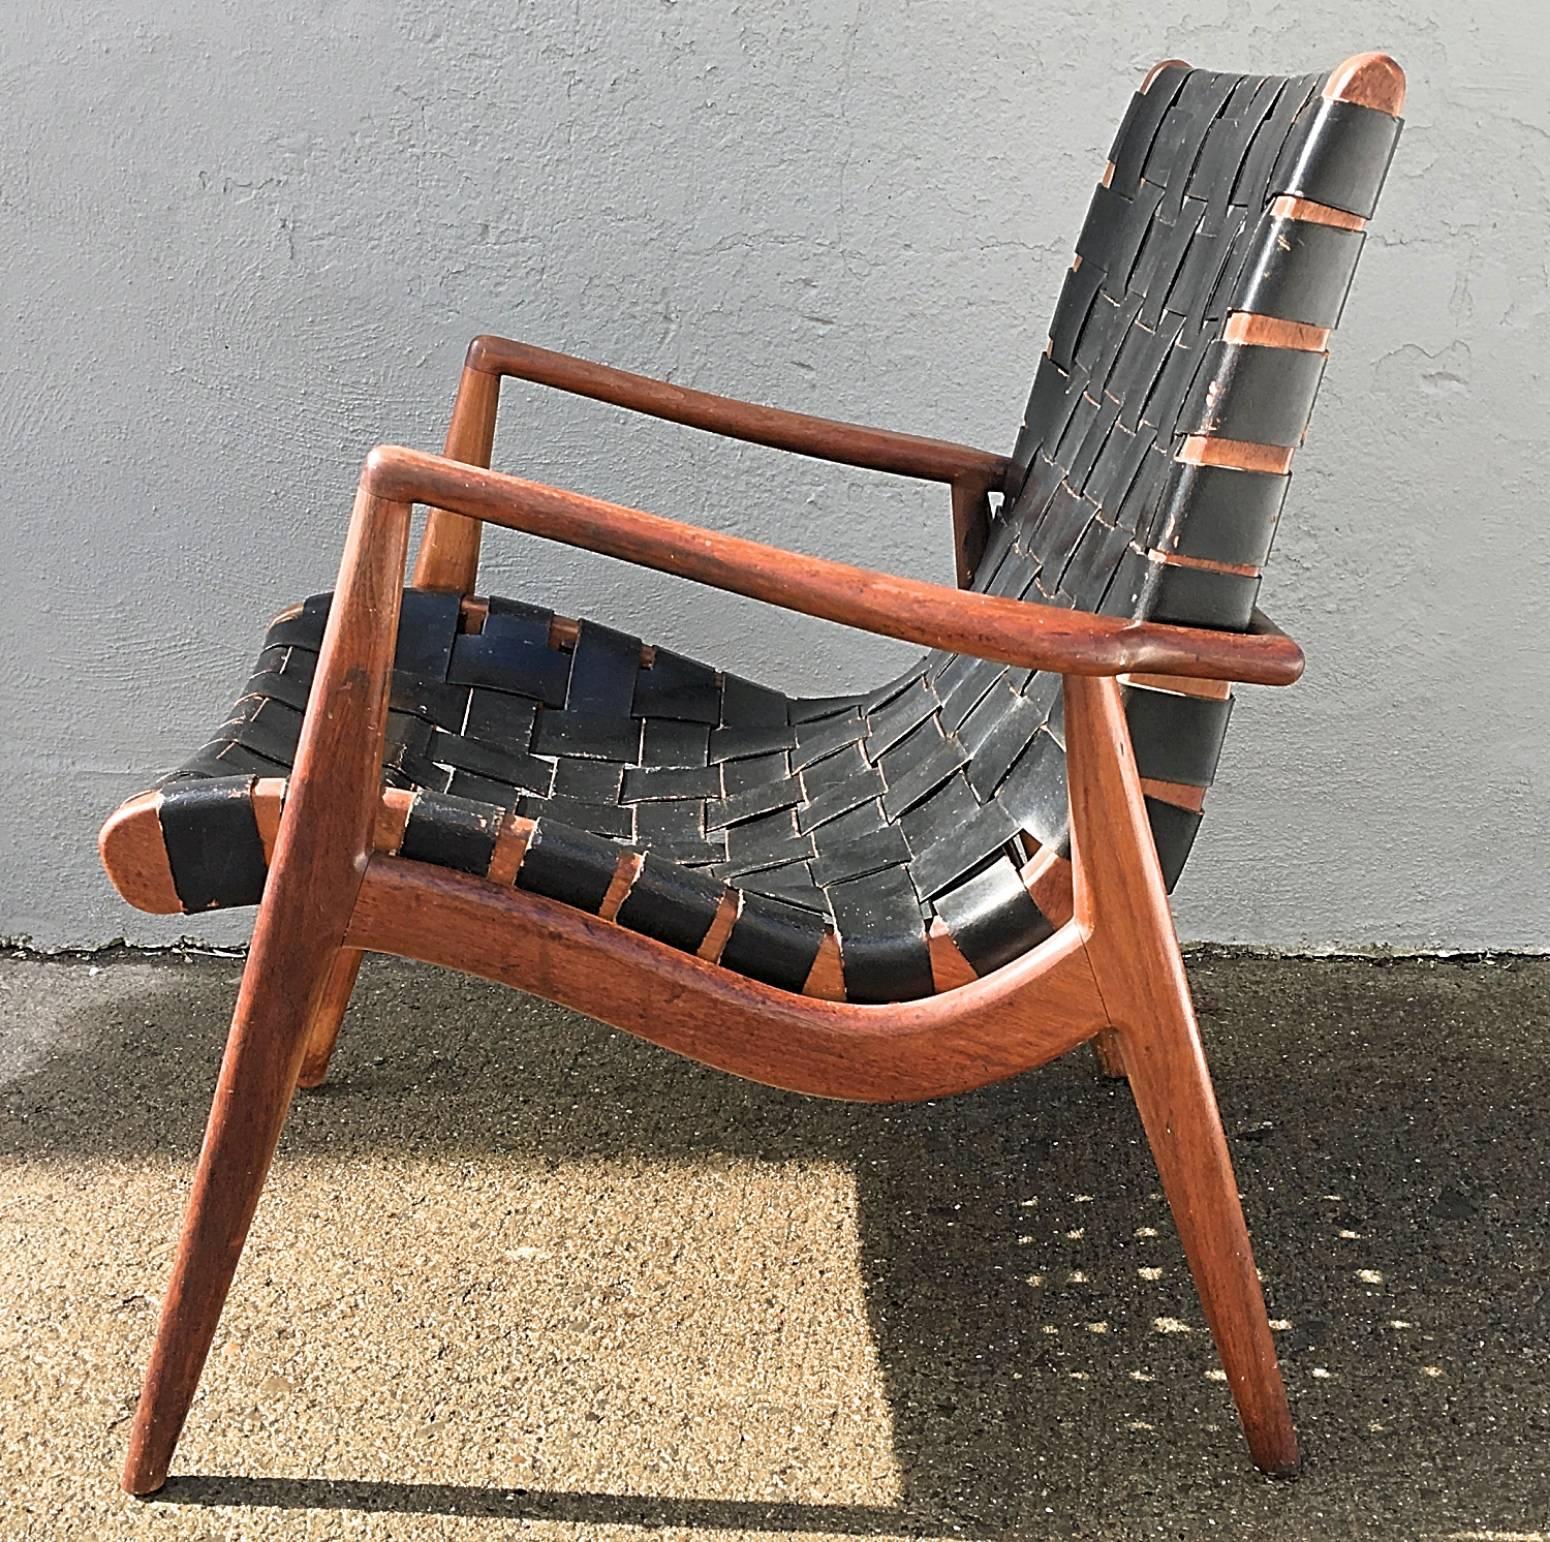 All original Mel Smilow walnut lounge chair. Beautiful lines with this chair. Warm and worn patina to frame and leather.